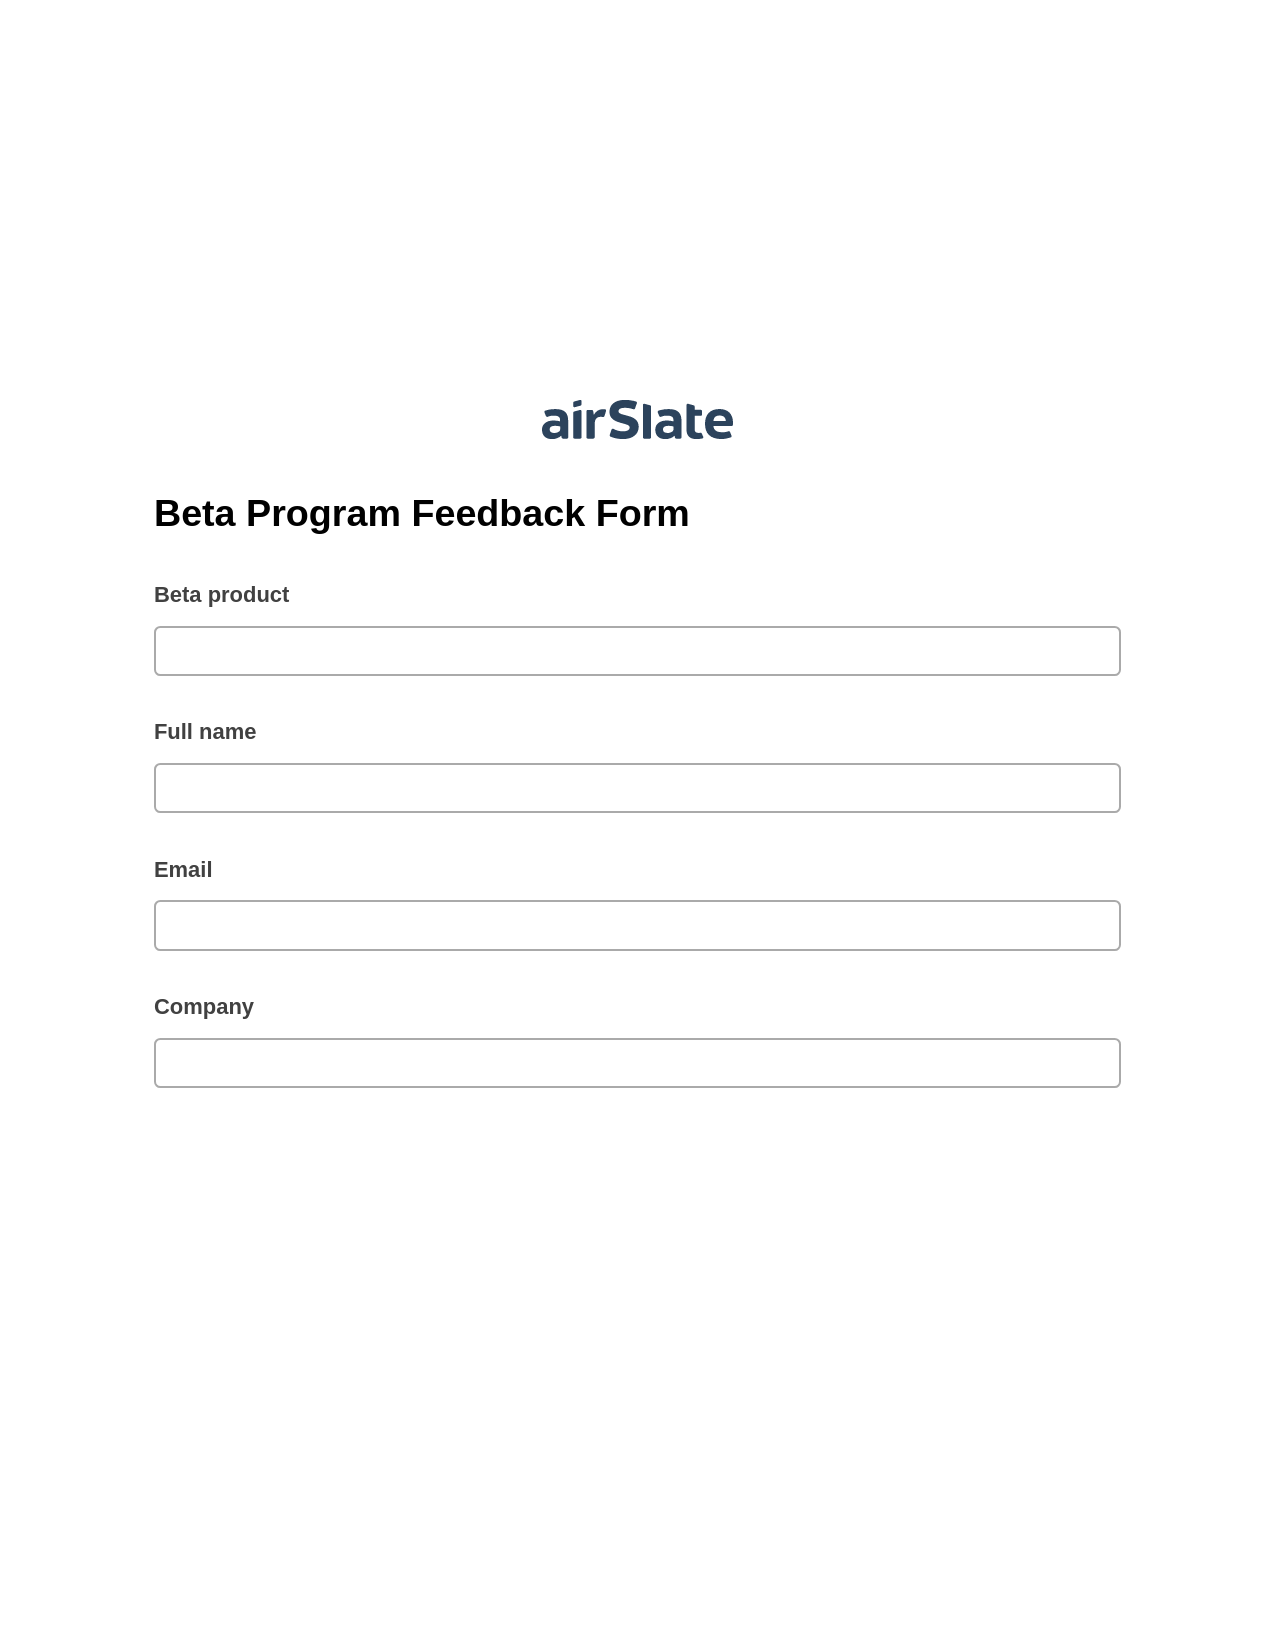 Beta Program Feedback Form Pre-fill from NetSuite Records Bot, Google Sheet Two-Way Binding Bot, Export to Formstack Documents Bot